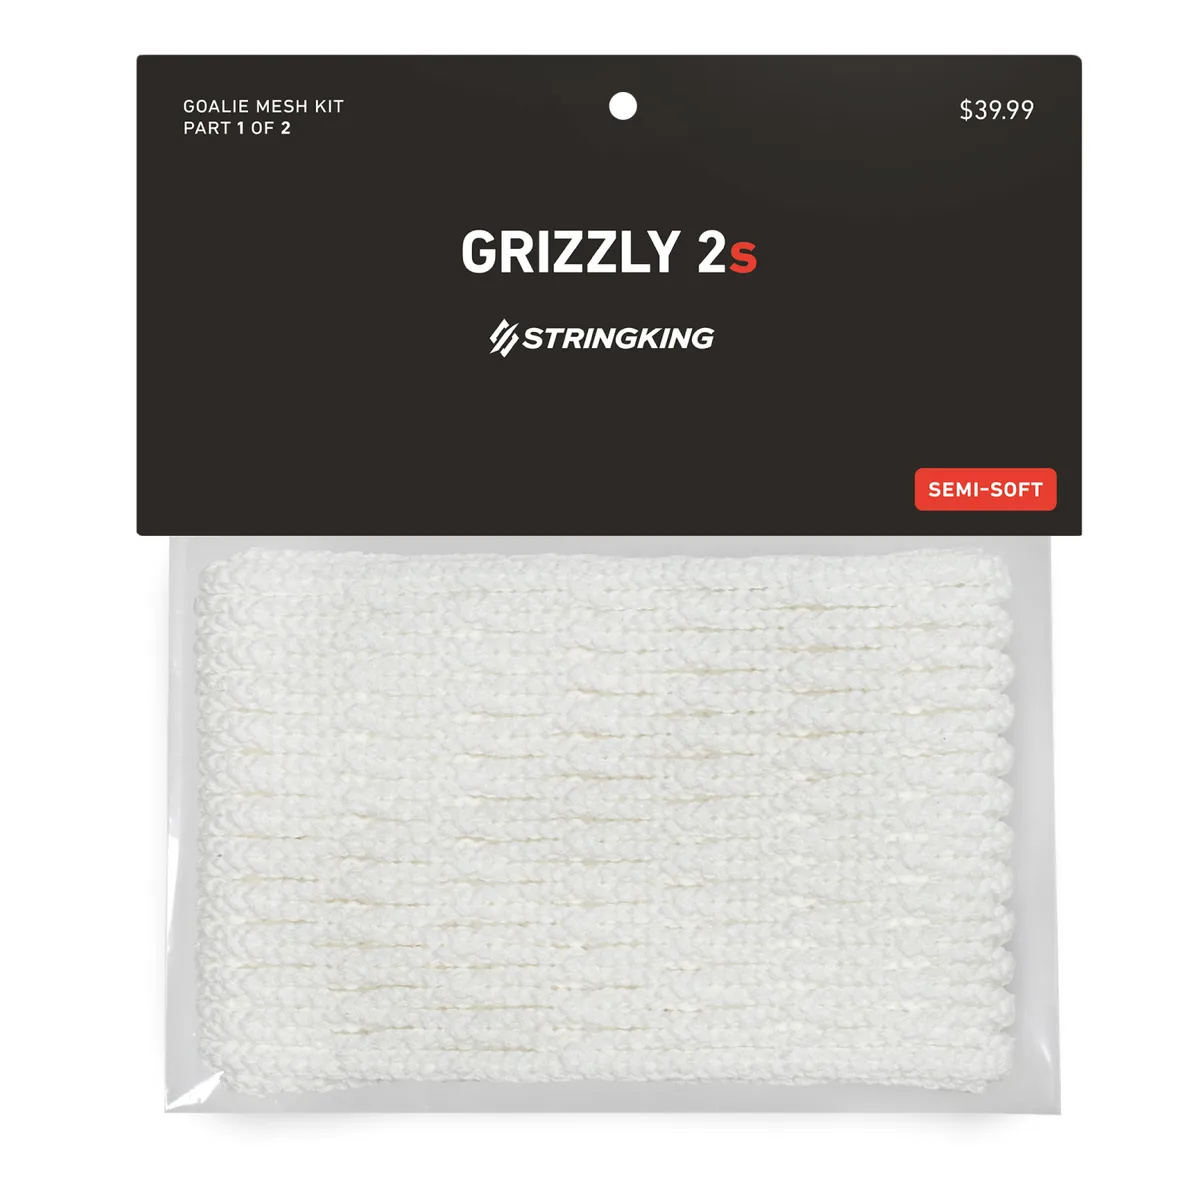 StringKing Grizzly 2s Goalie Lacrosse Mesh White Packaged